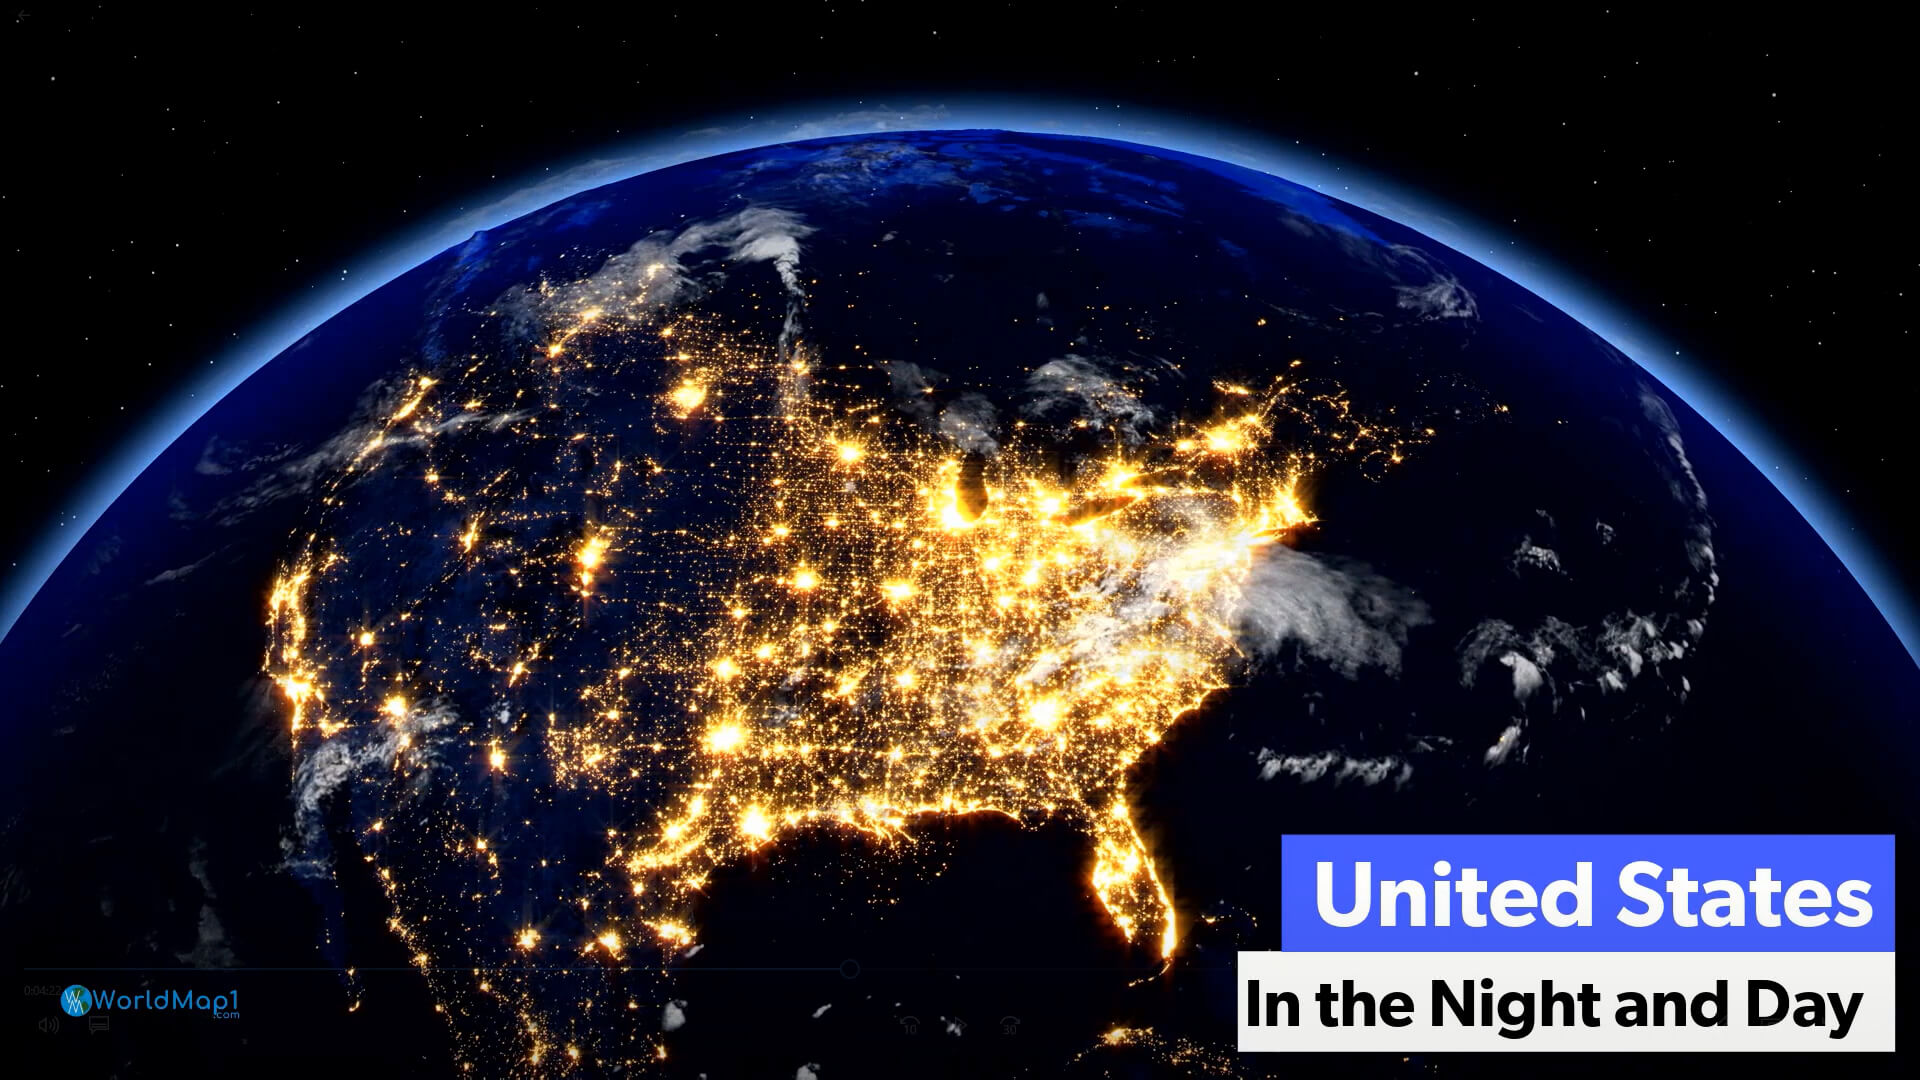 United States in the Night from Space